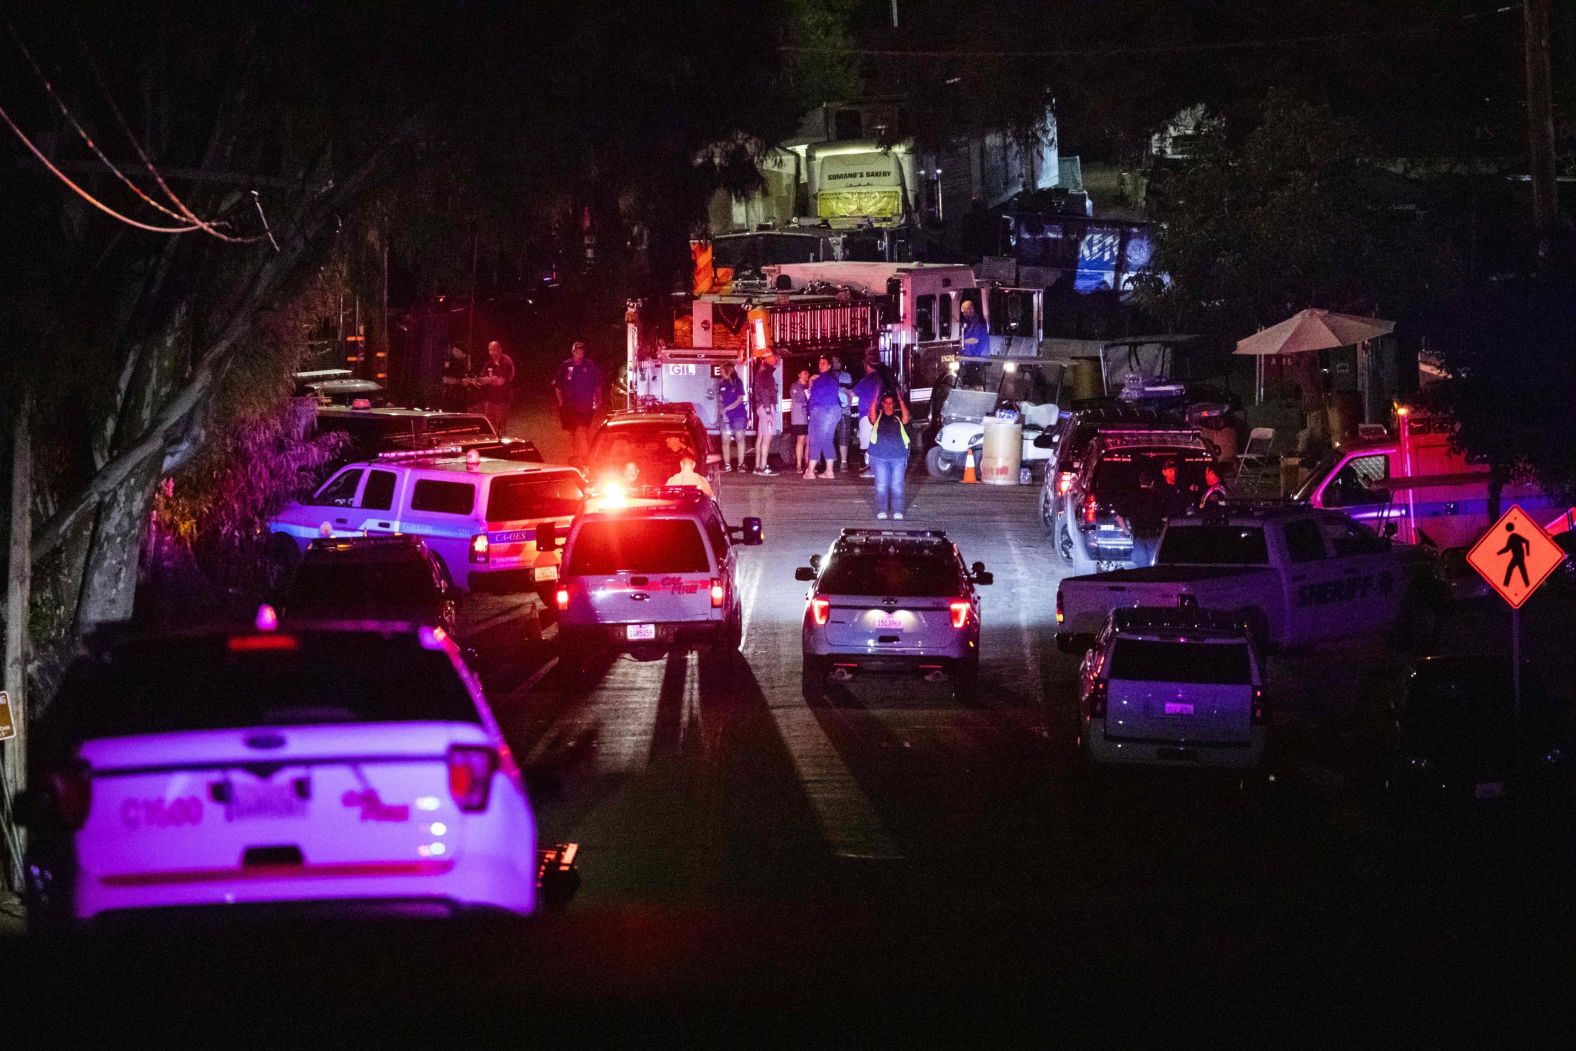 Police vehicles arrive on the scene following a deadly shooting at the Gilroy Garlic Festival on Sunday.